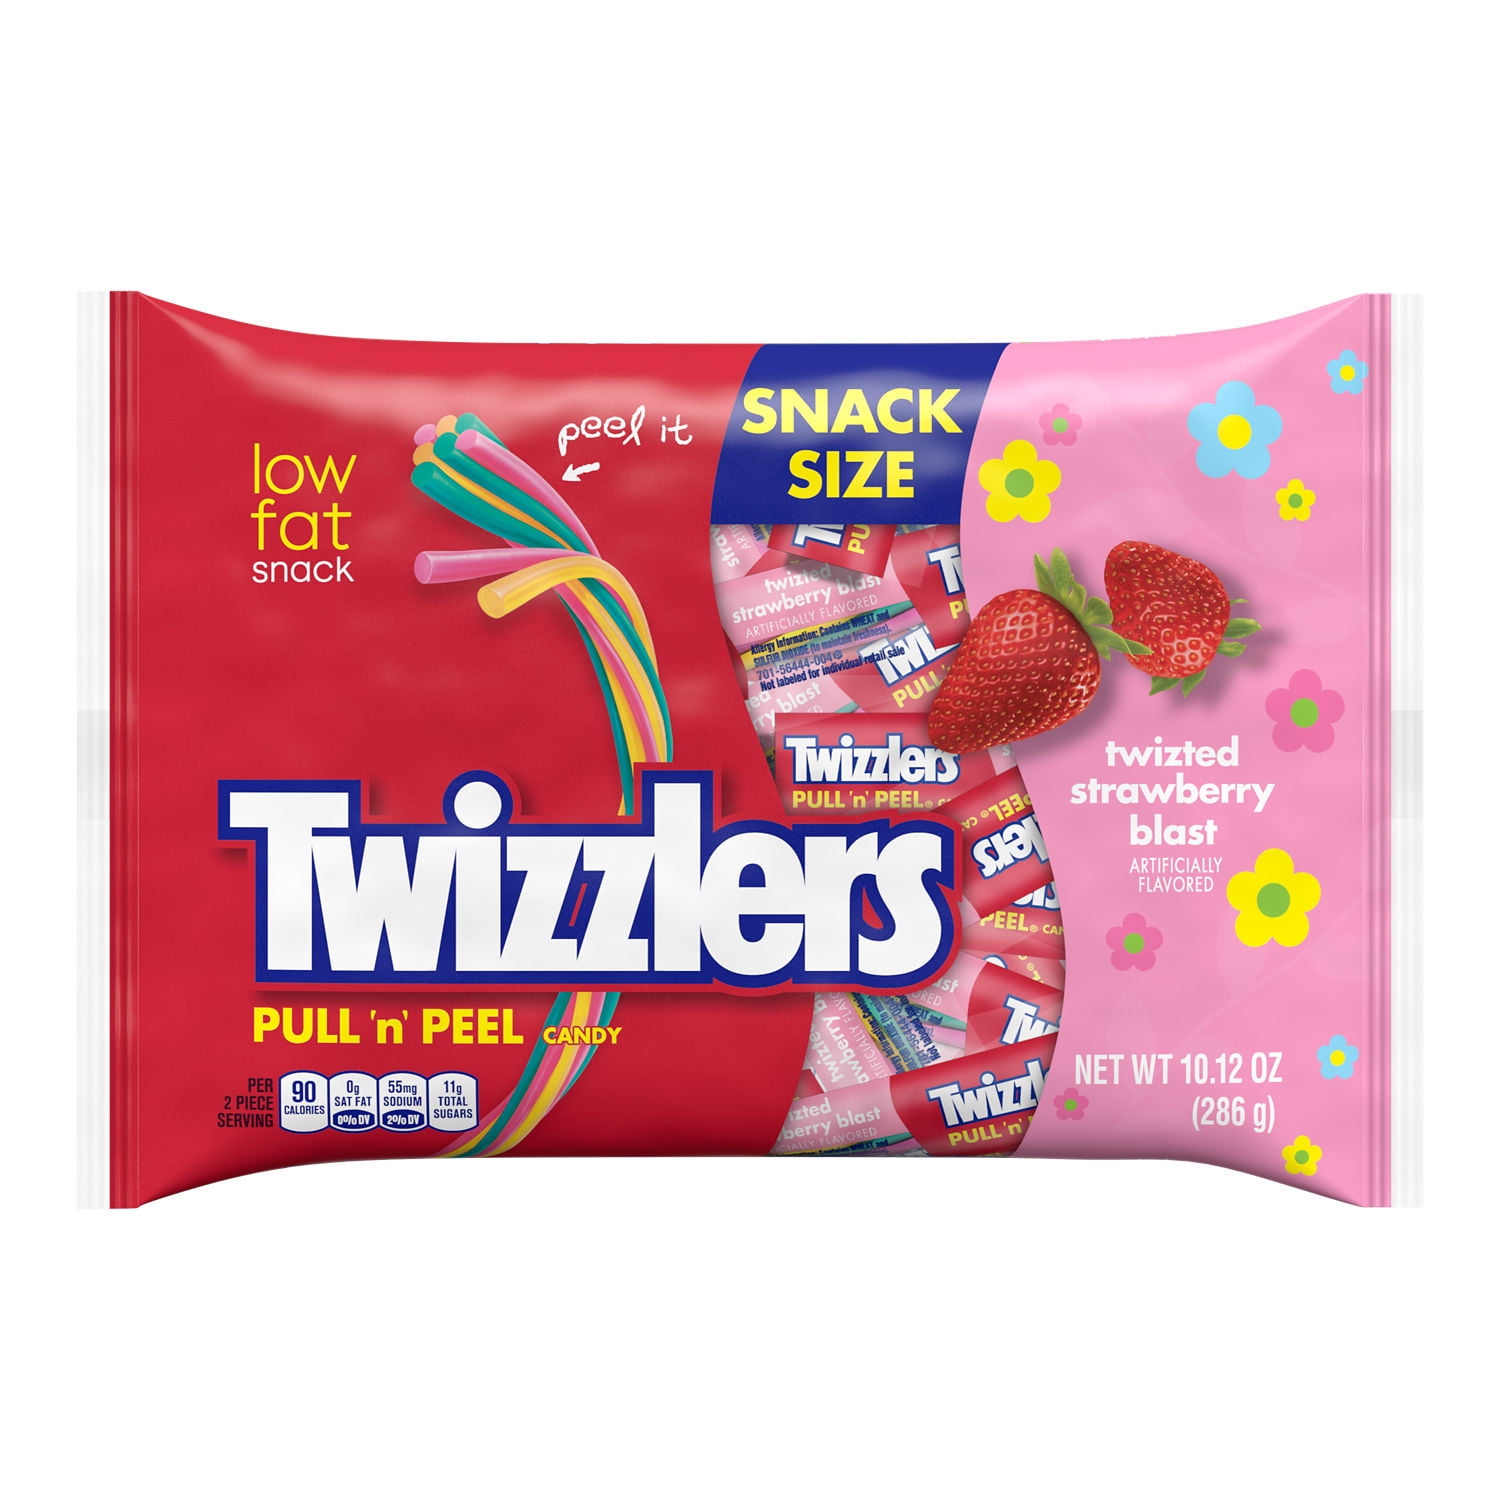 TWIZZLERS, PULL 'N' PEEL TWISTED Strawberry Blast Chewy Treats, Easter Candy, 10.12 oz, Bag